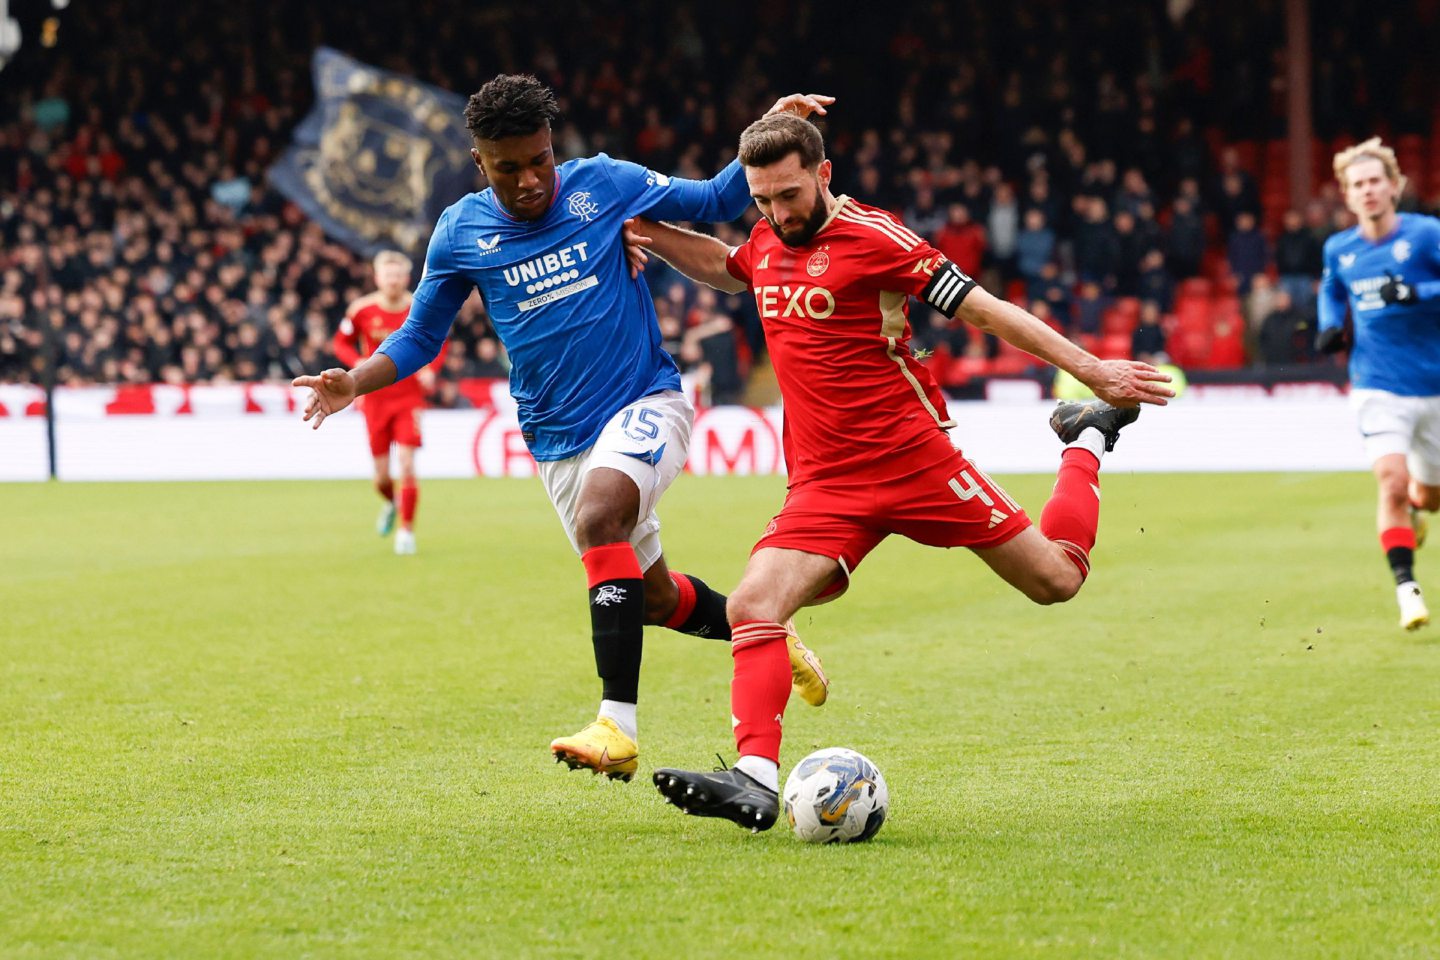 Aberdeen captain Graeme Shinnie in action during the 1-1 draw with Rangers at Pittodrie.